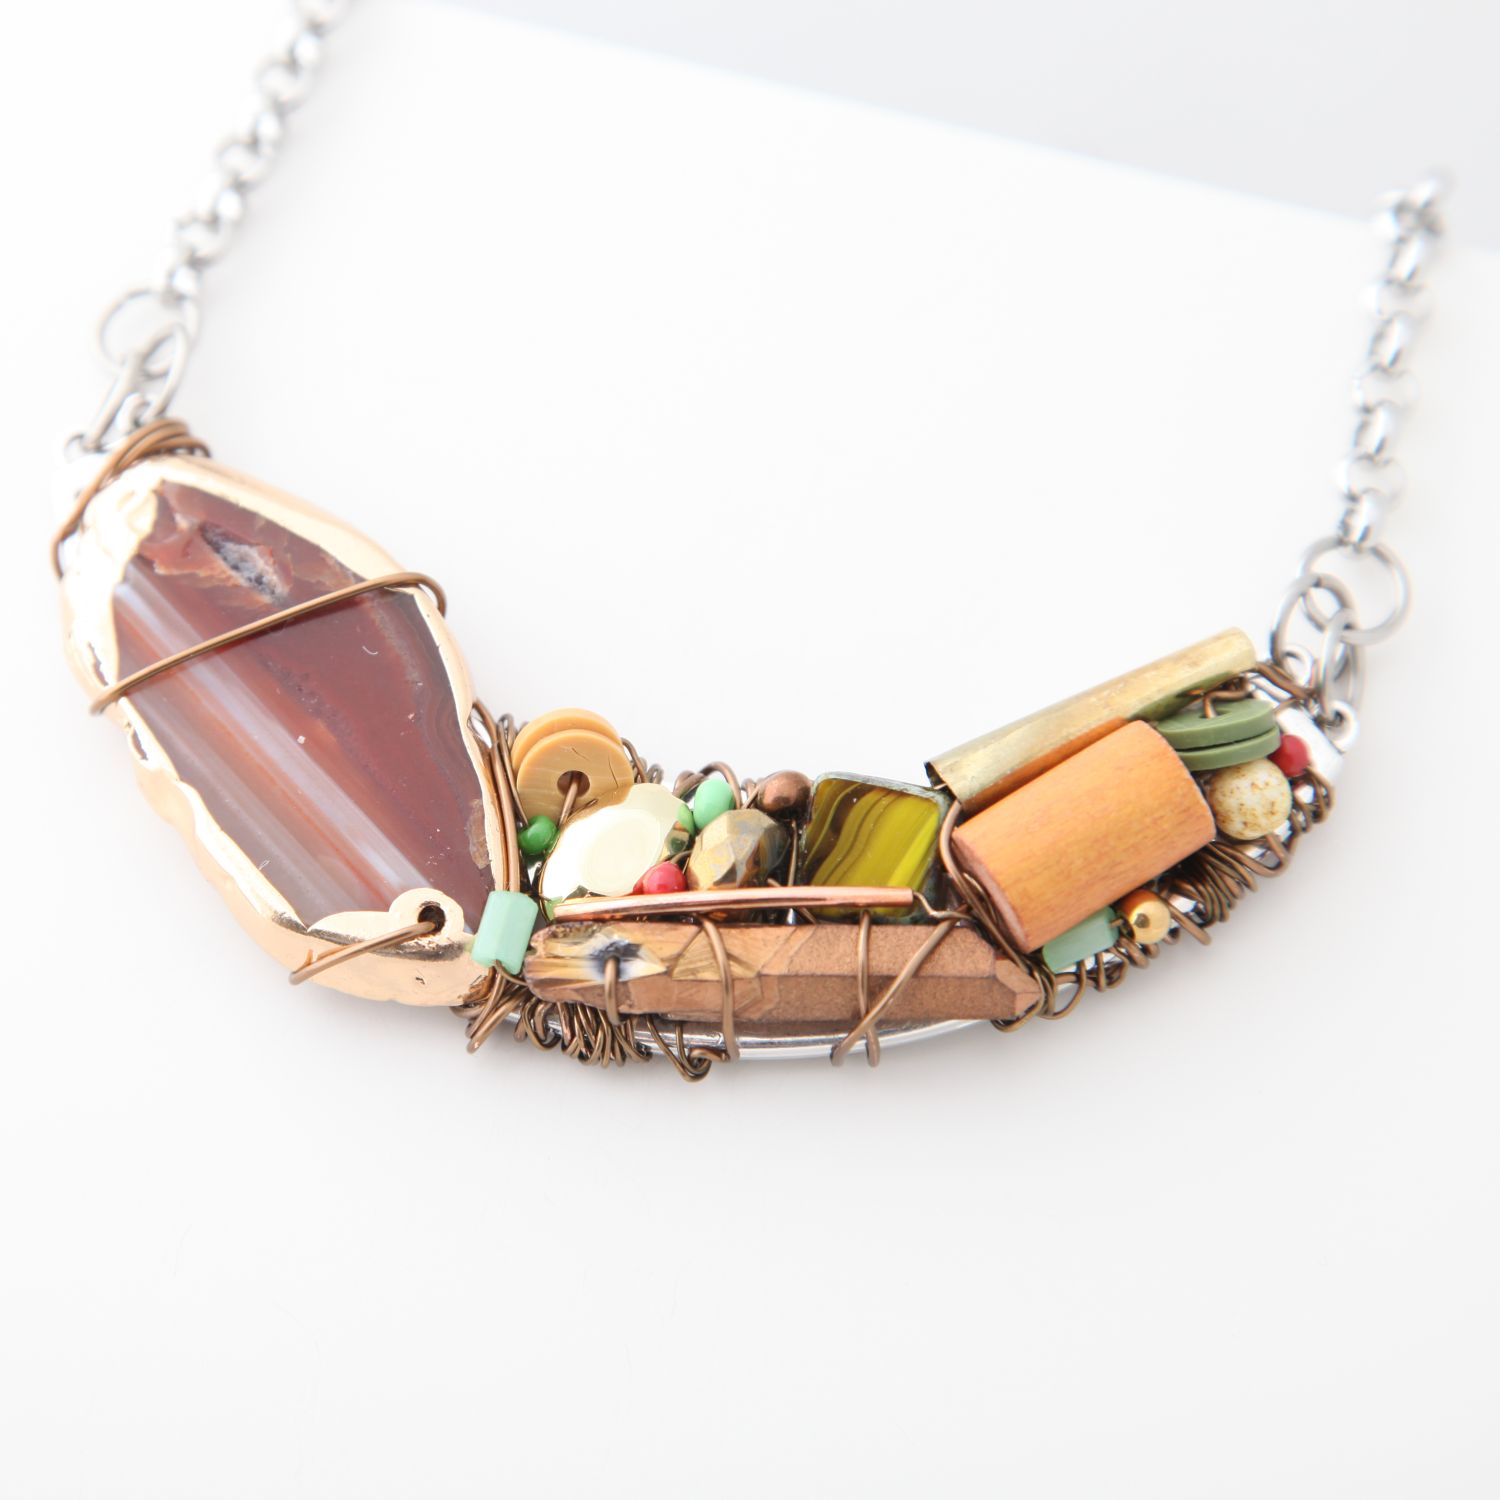 Farheen Ali: Autumn Crescent Necklace Product Image 2 of 2